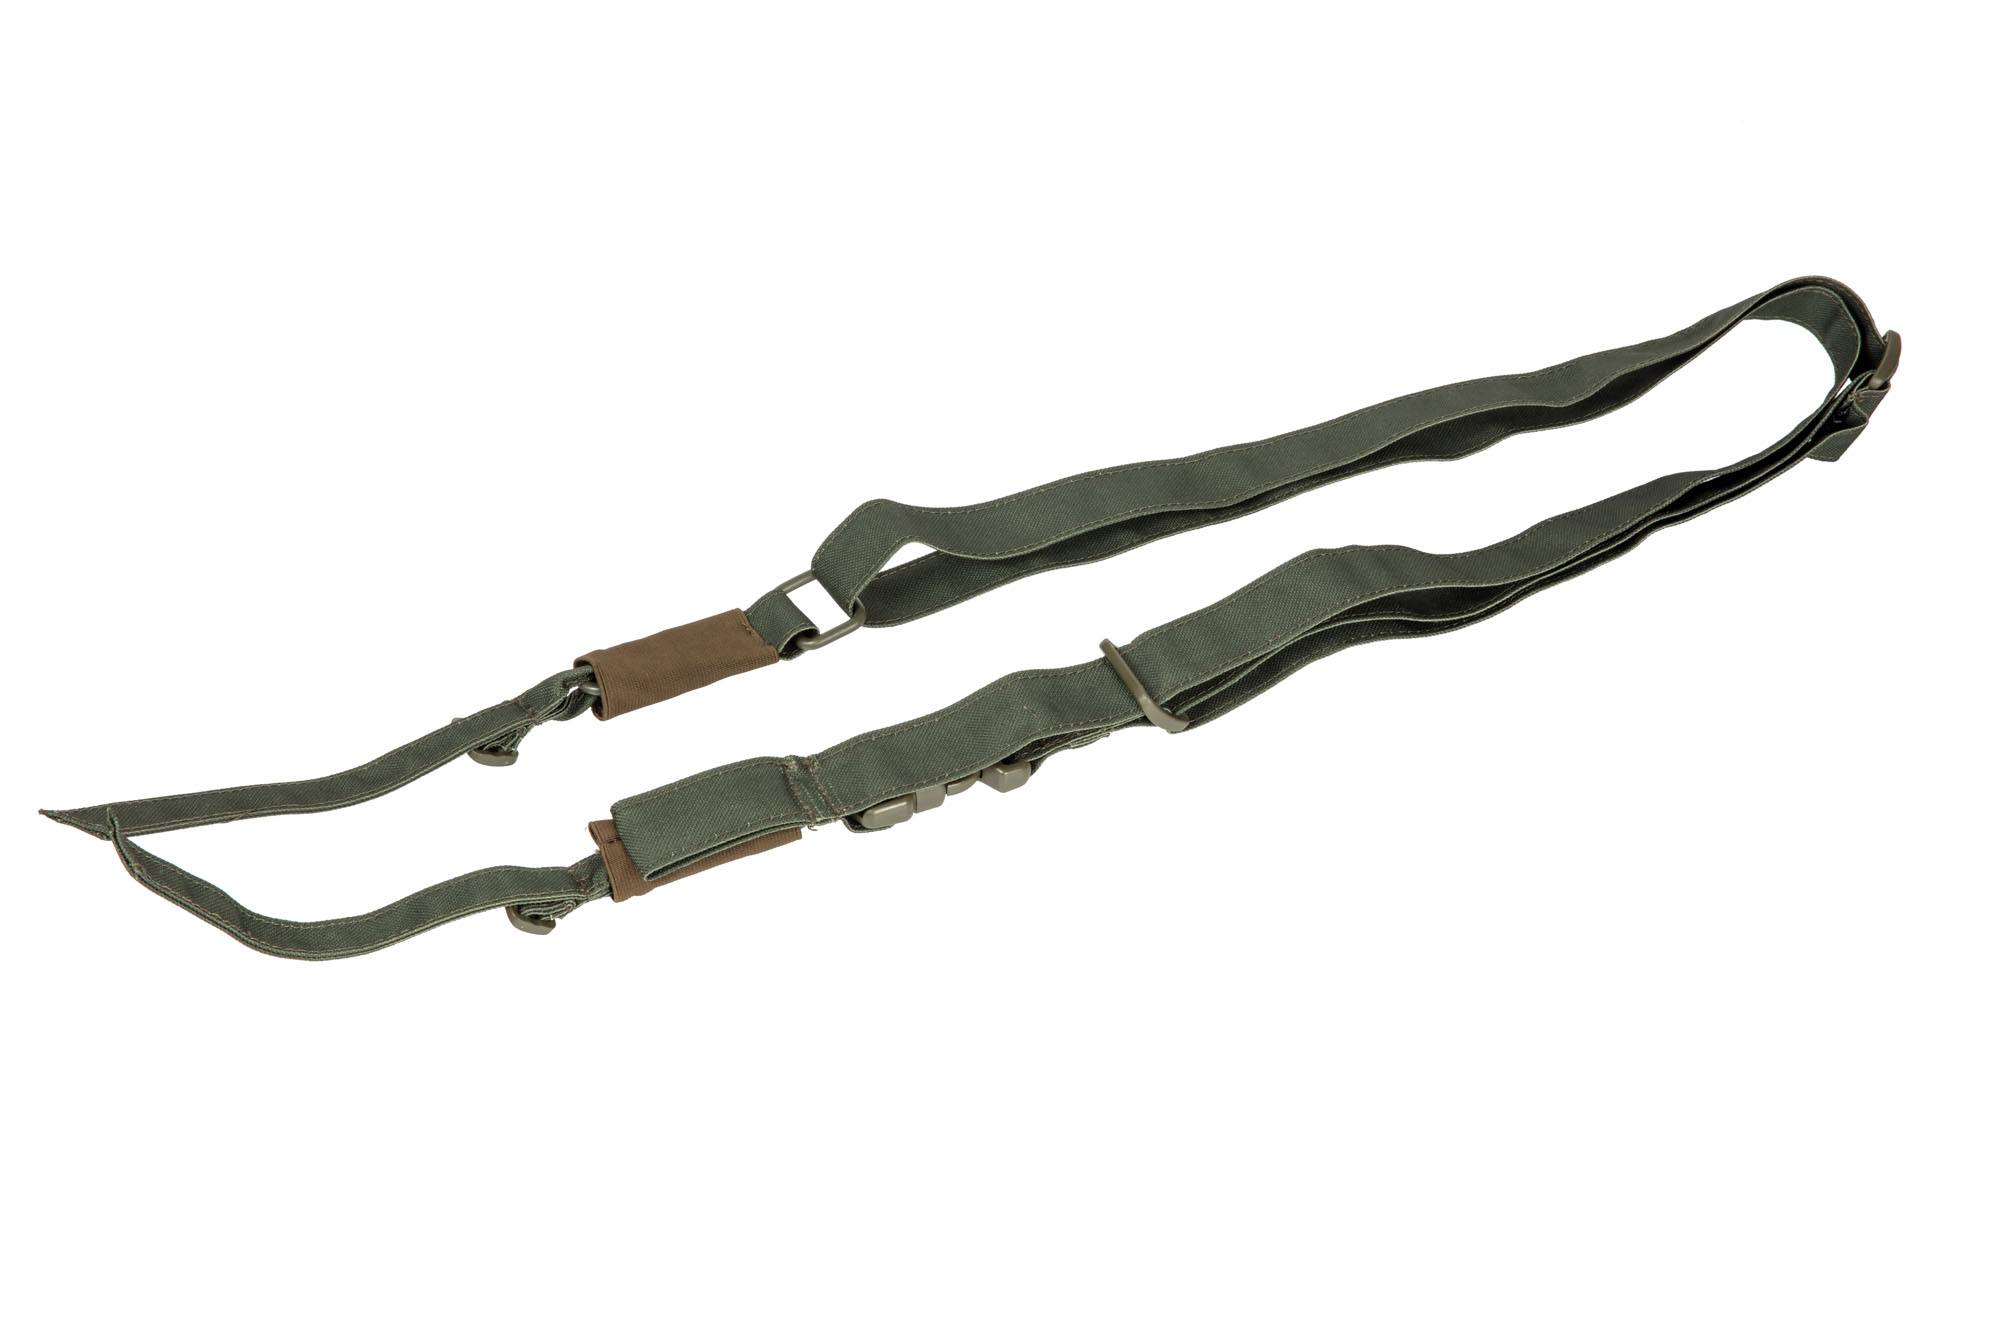 Three-Point Specna Arms II Tactical Sling - Olive Drab by Specna Arms on Airsoft Mania Europe